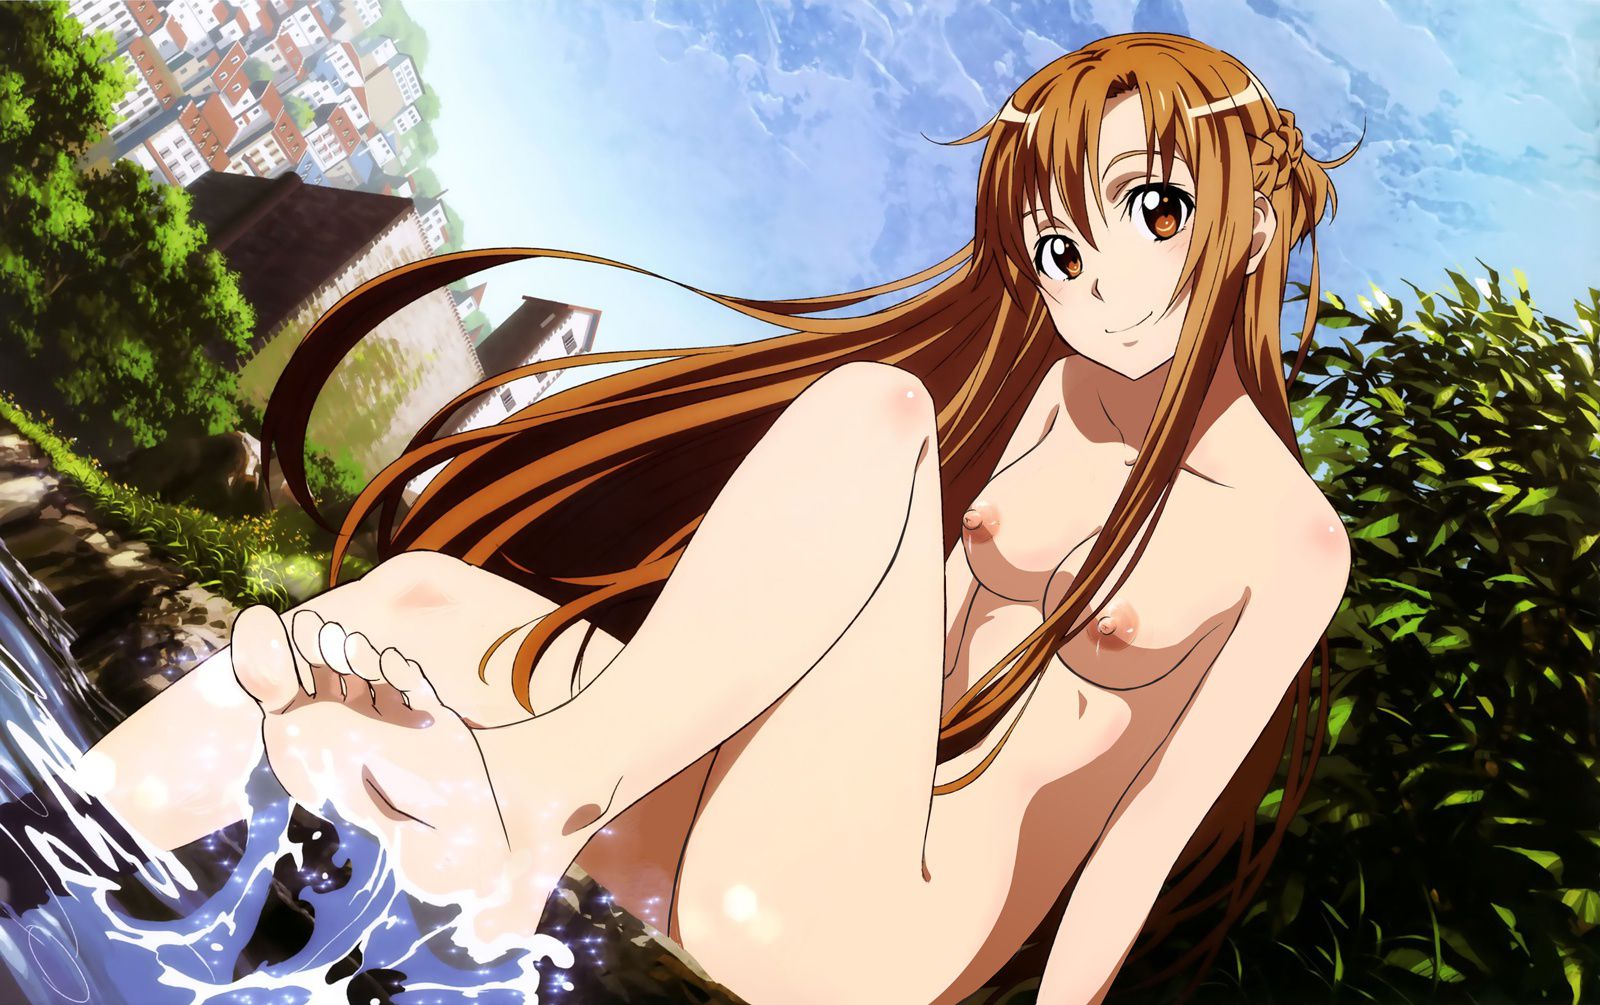 【Secondary Erotic】 Sword Art Online Stripped Coraello images of heroines appearing are here 19